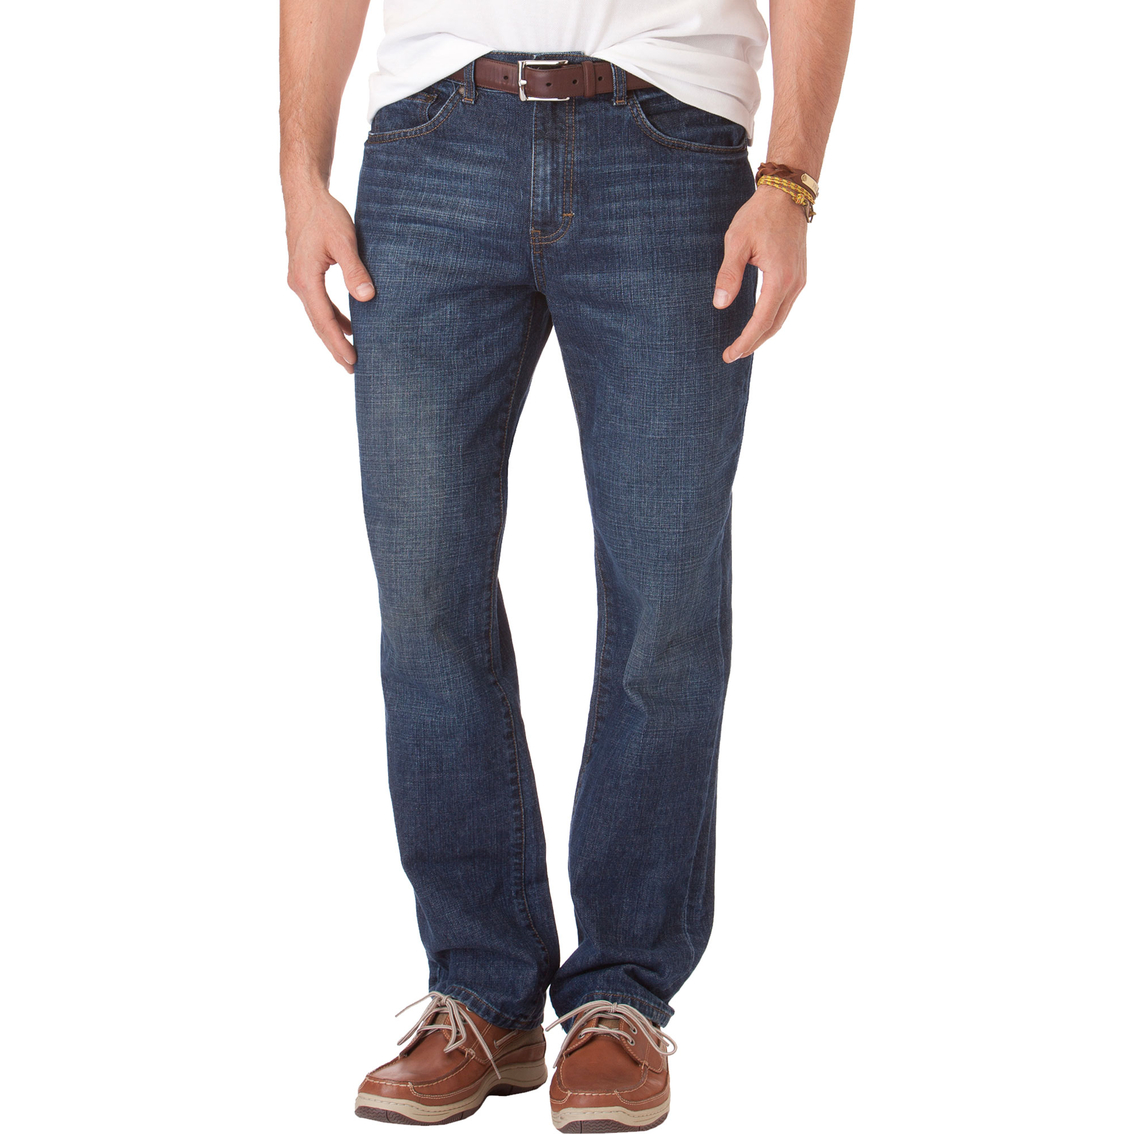 Chaps Straight Fit Jeans | Saturday - Wk 77 | Shop The Exchange